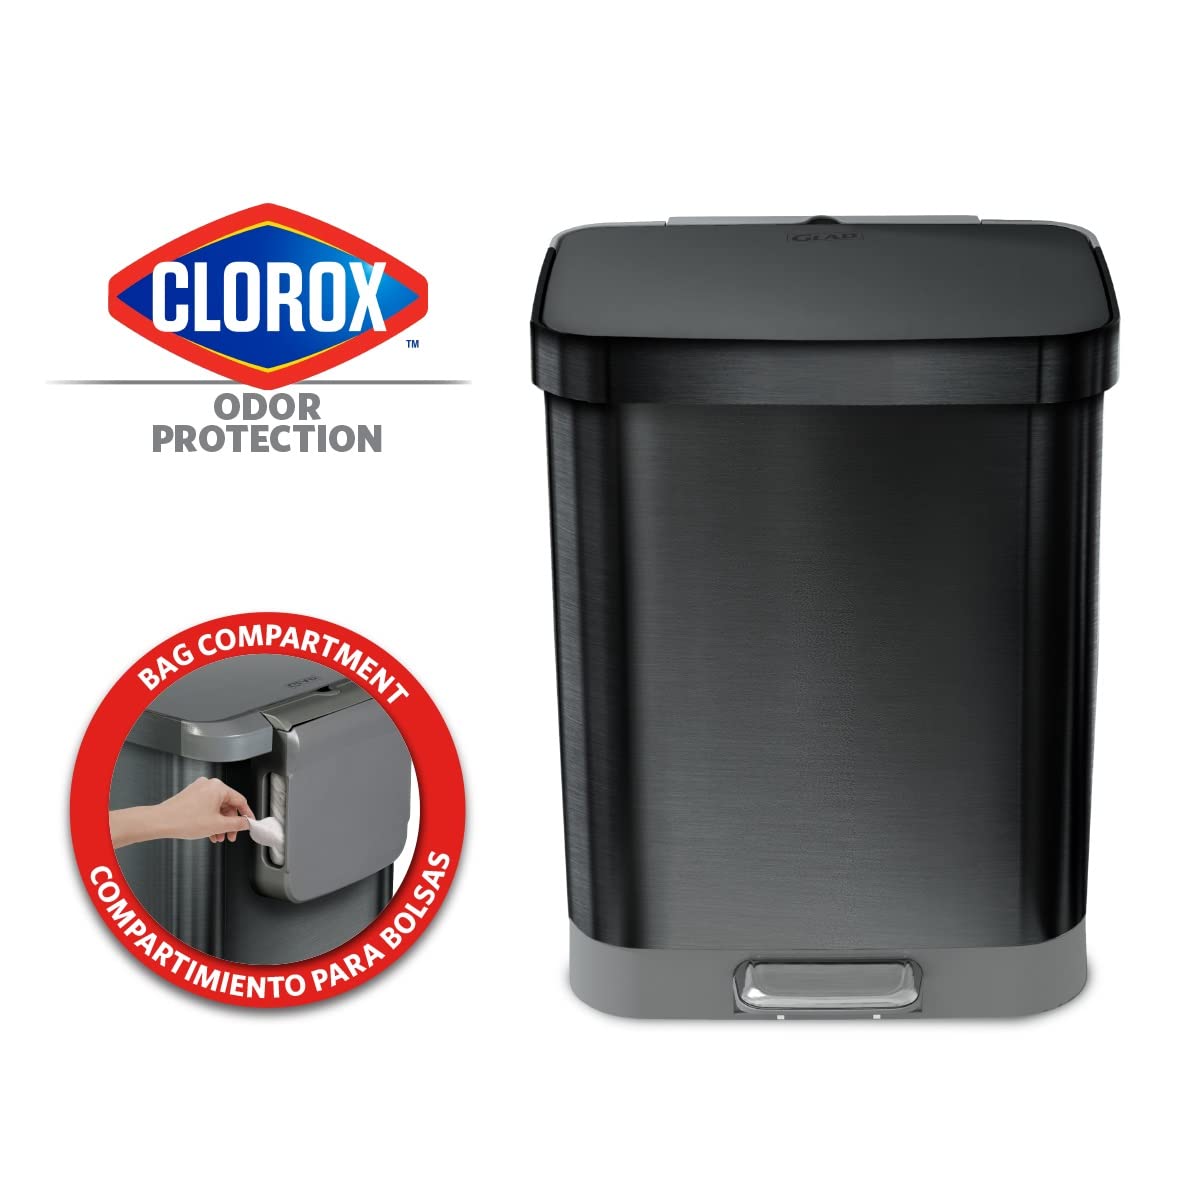 https://bigbigmart.com/wp-content/uploads/2023/07/Glad-Stainless-Steel-Step-Trash-Can-with-Clorox-Odor-Protection-Large-Metal-Kitchen-Garbage-Bin-with-Soft-Close-Lid-Foot-Pedal-and-Waste-Bag-Roll-Holder-13-Gallon-All-Pewter1.jpg